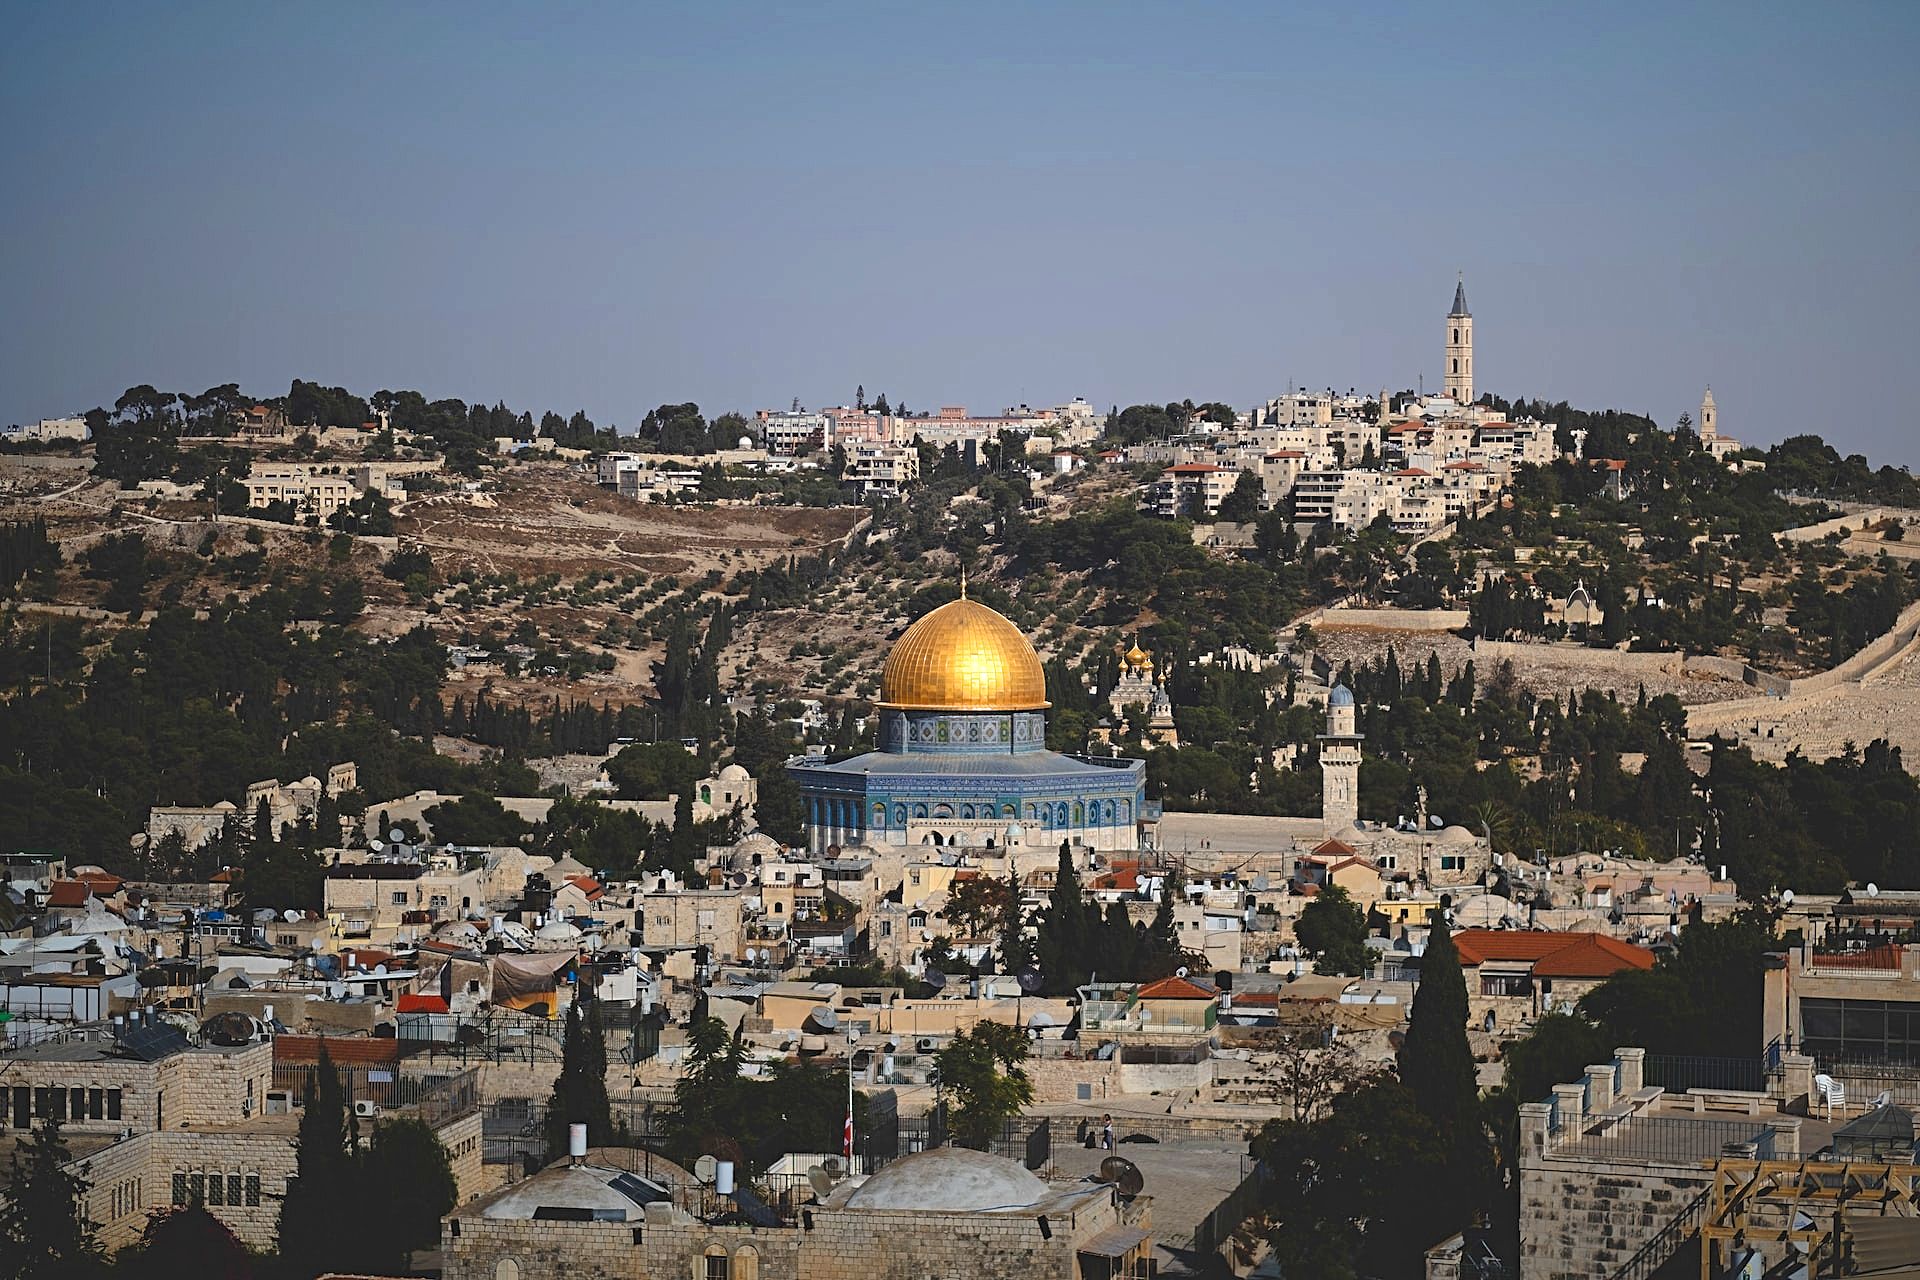 Dome of the Rock, over the skyline of the Old City of Jerusalem